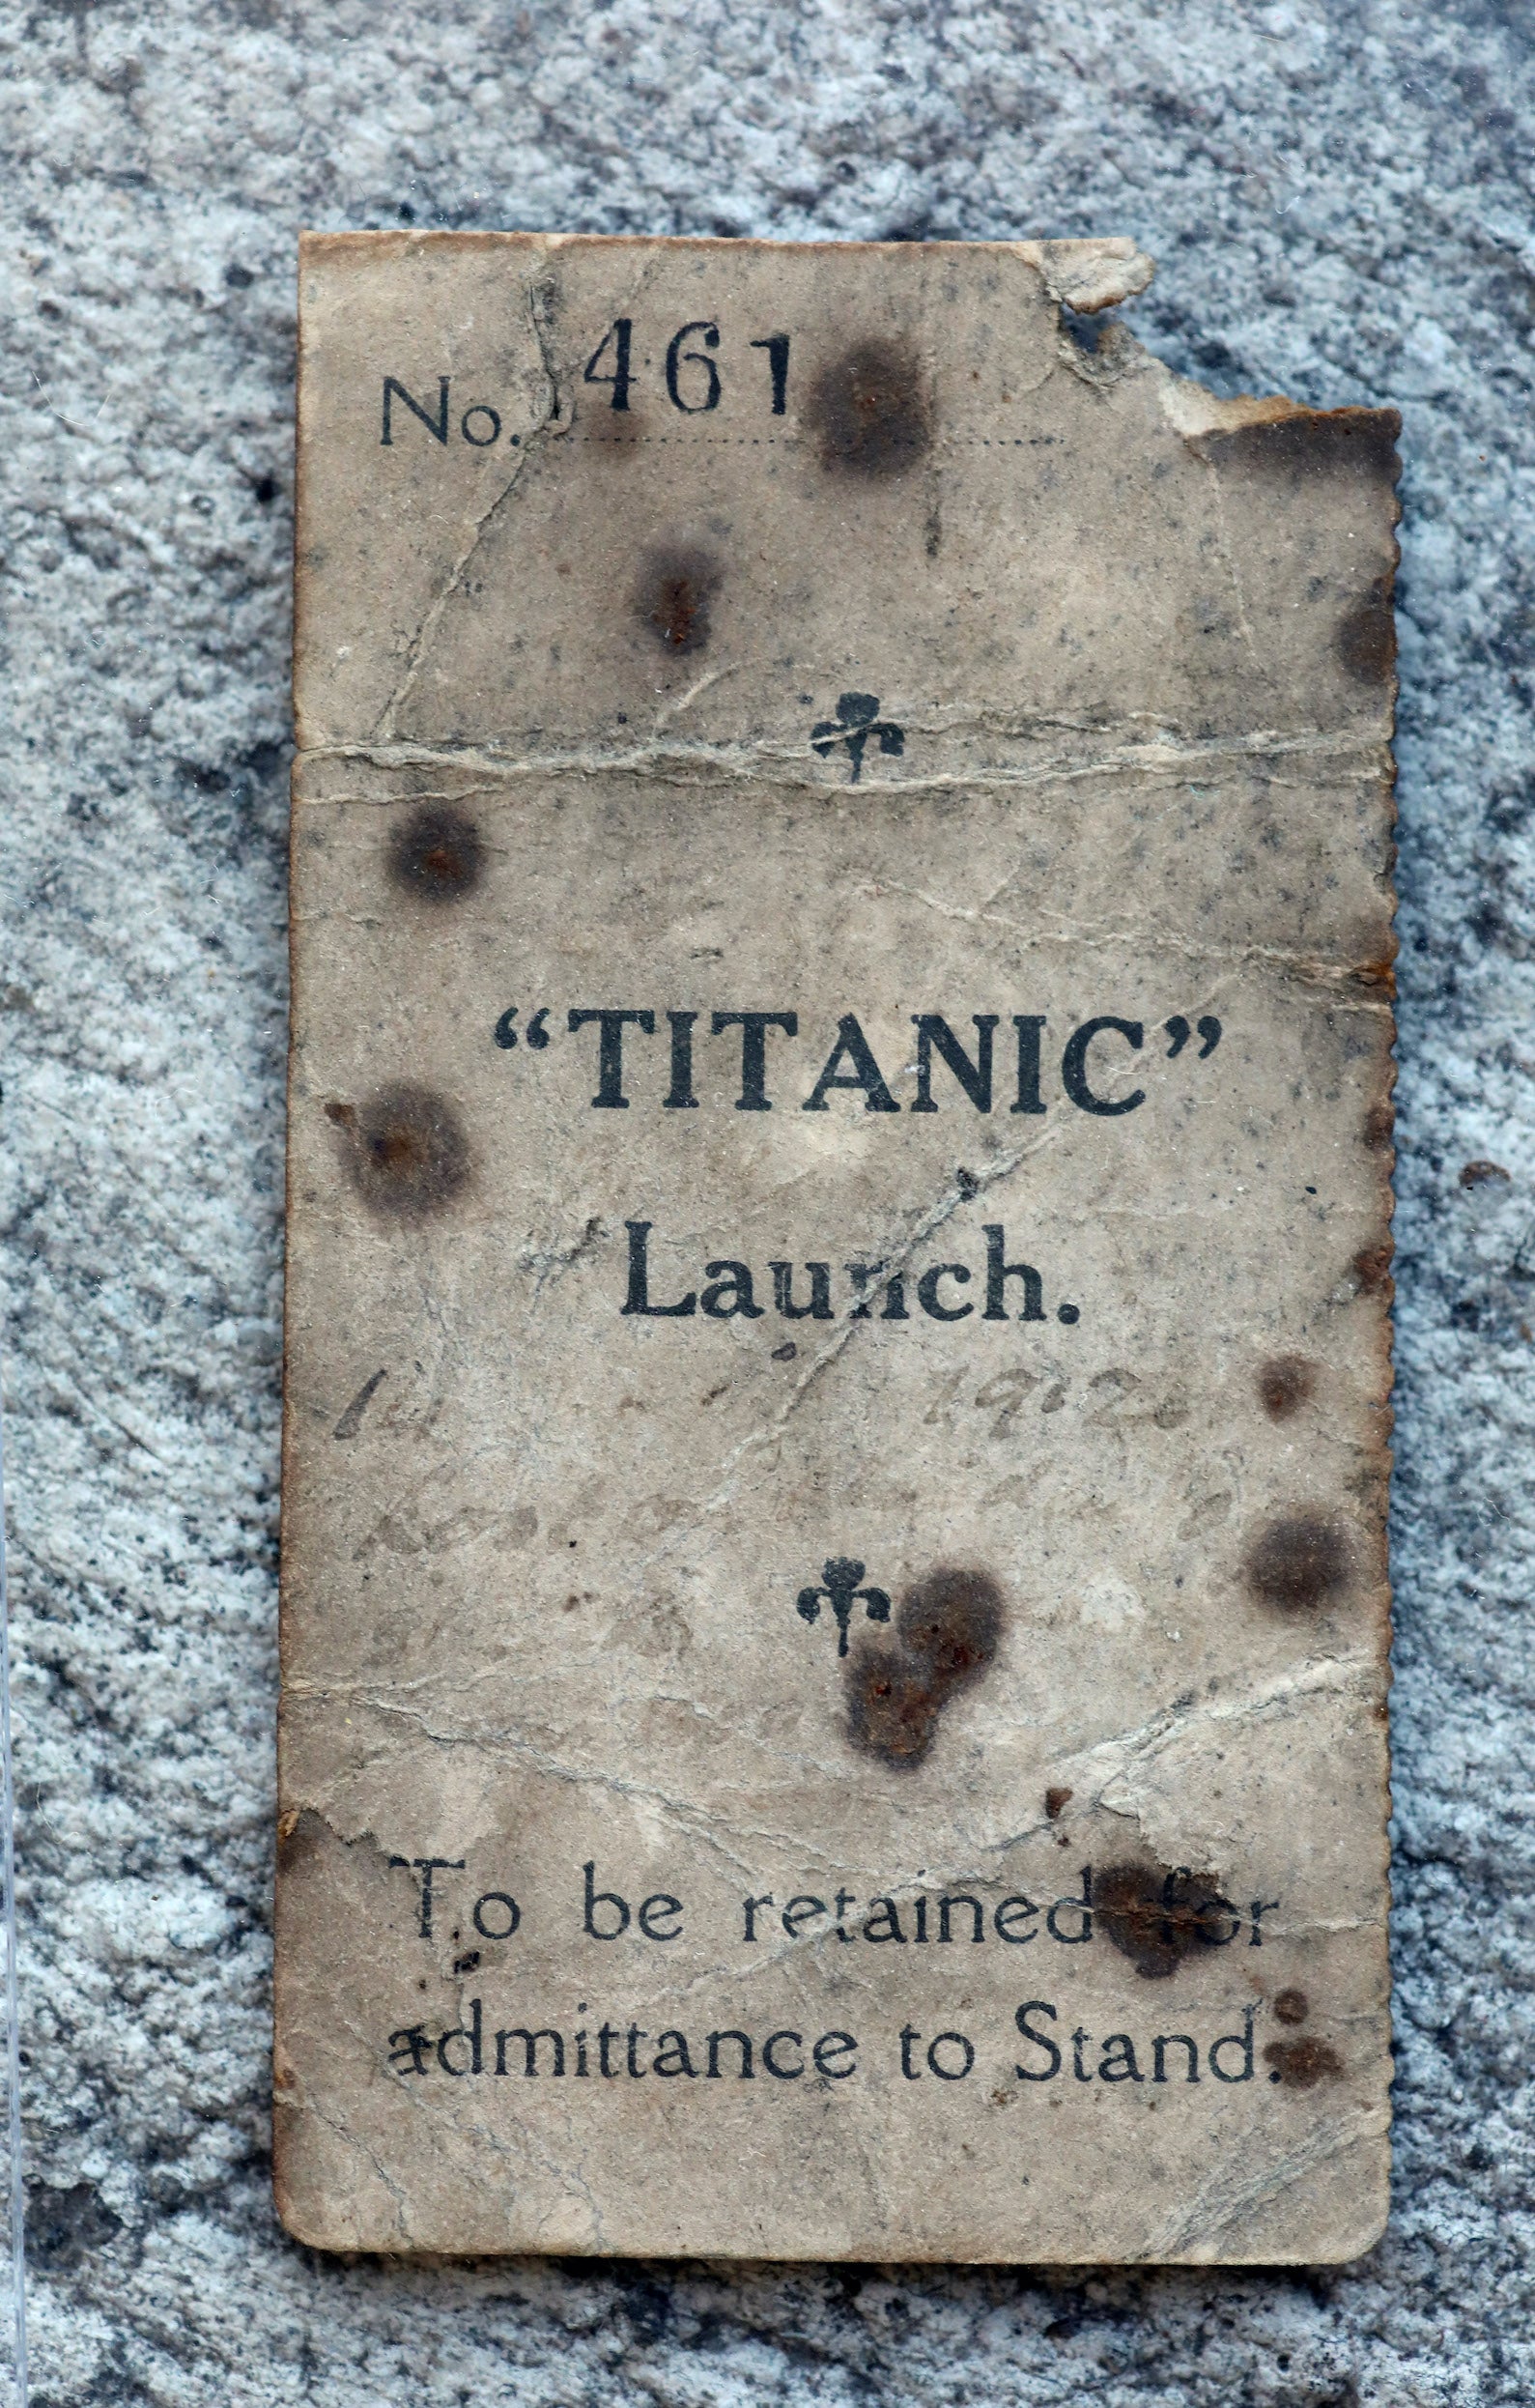 : A Titanic launch stub, which was reputedly owned by a friend of former Harland & Wolff Managing Director, Thomas Andrews. (Press Eye/PA)